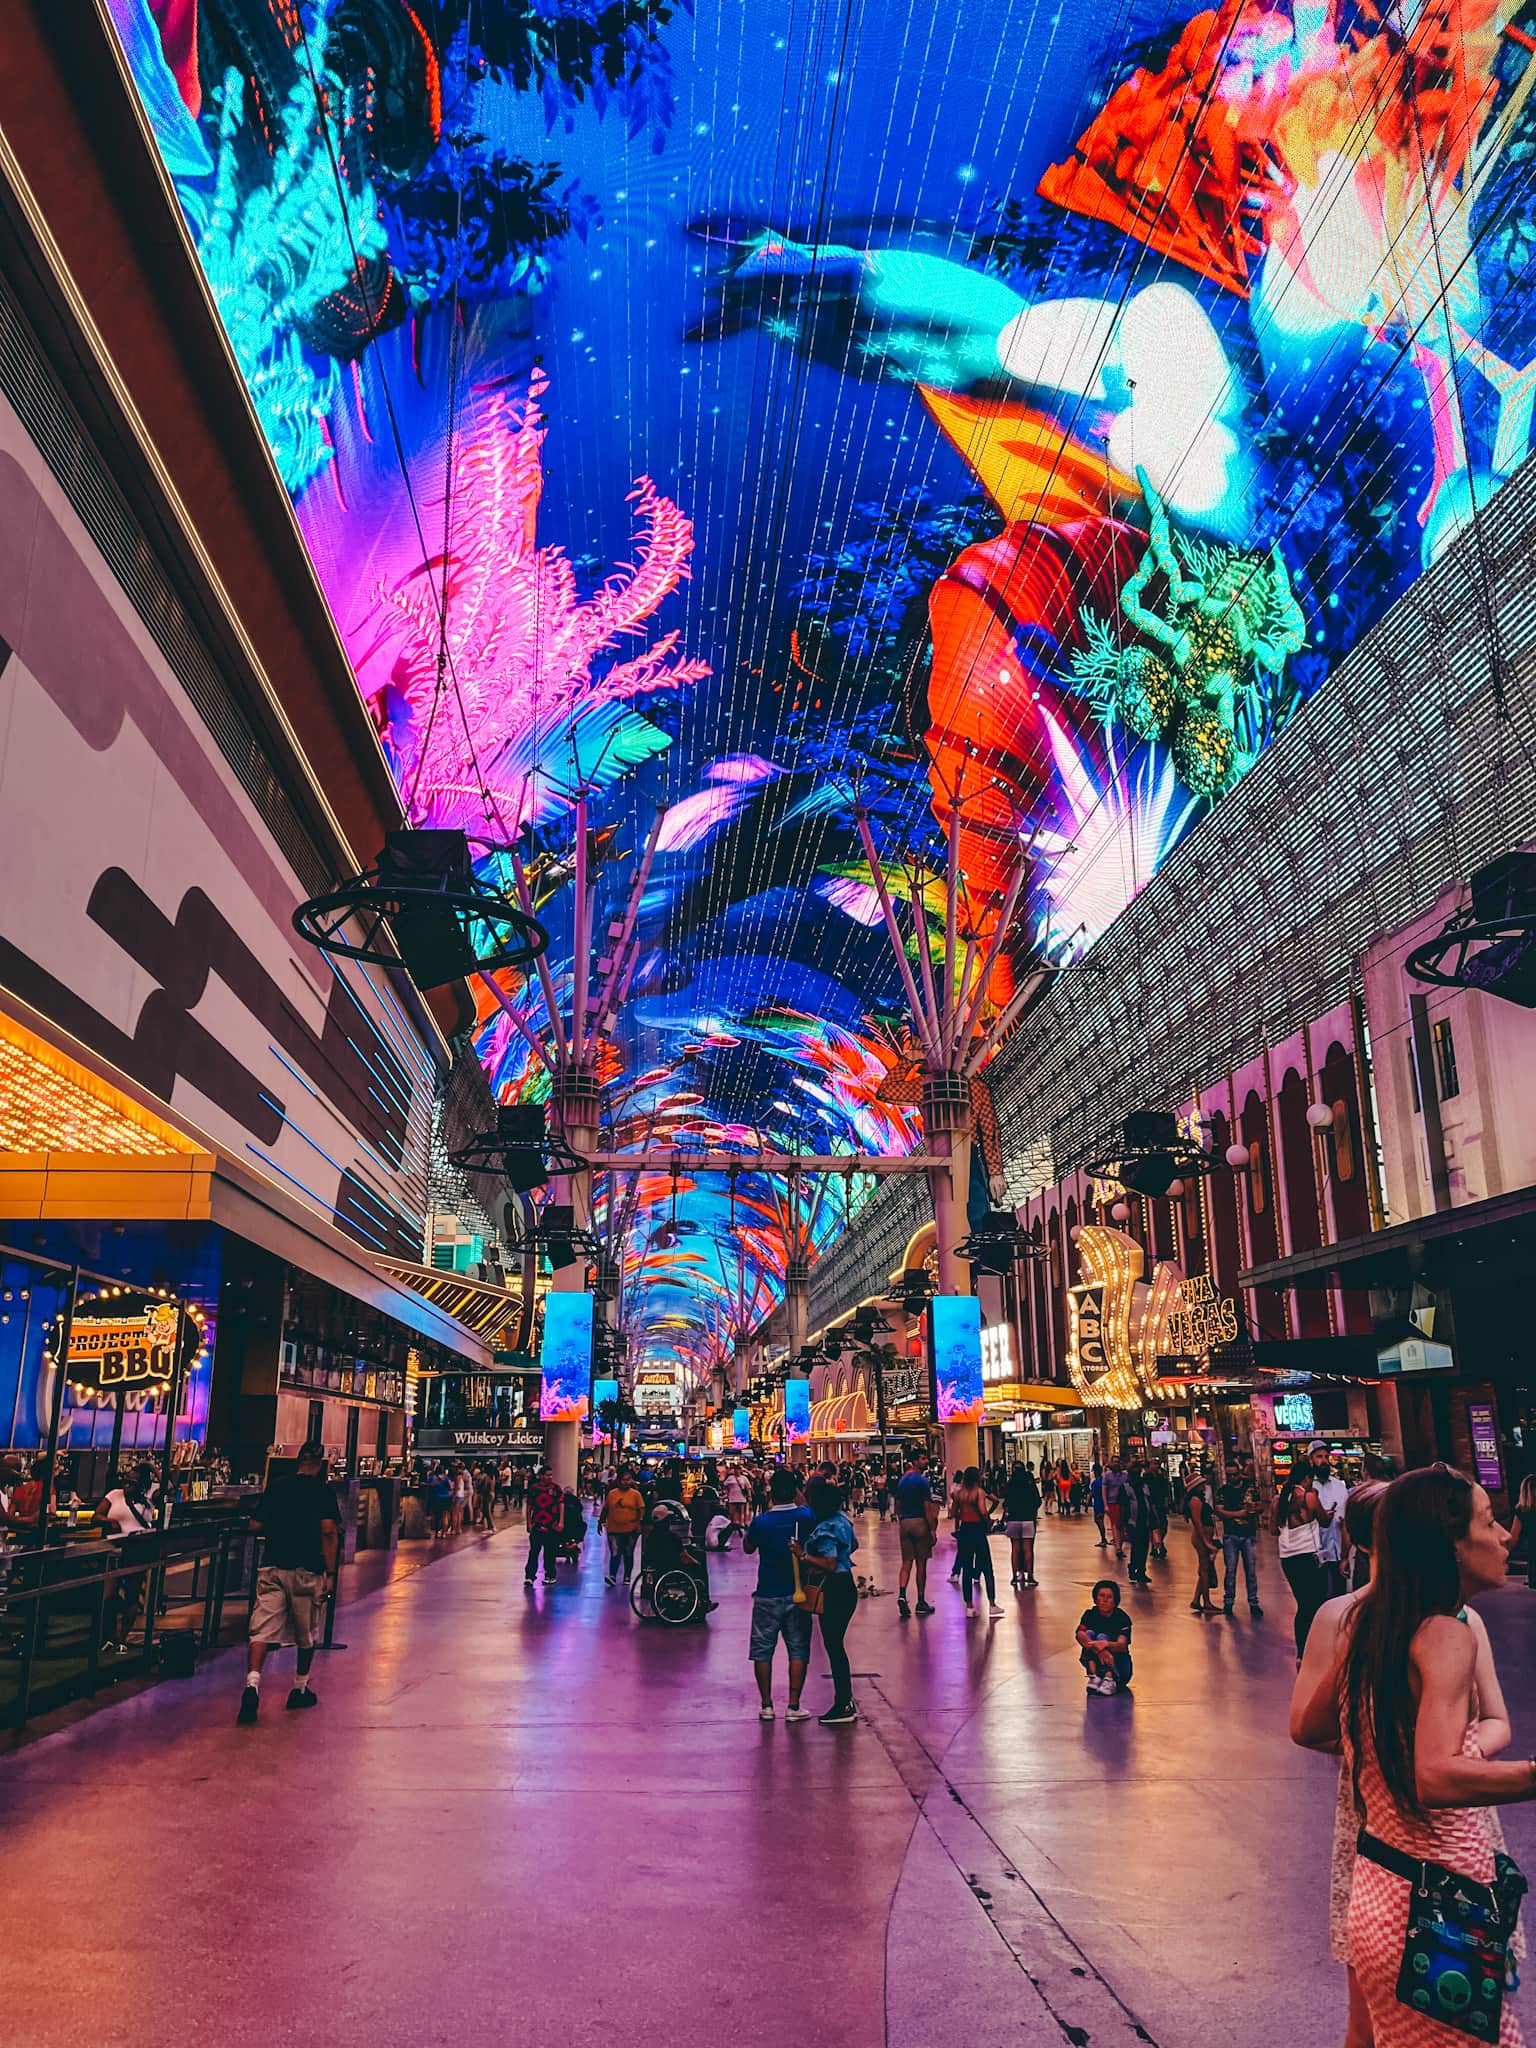 Things to Do on Fremont Street in Downtown Las Vegas - Thrillist